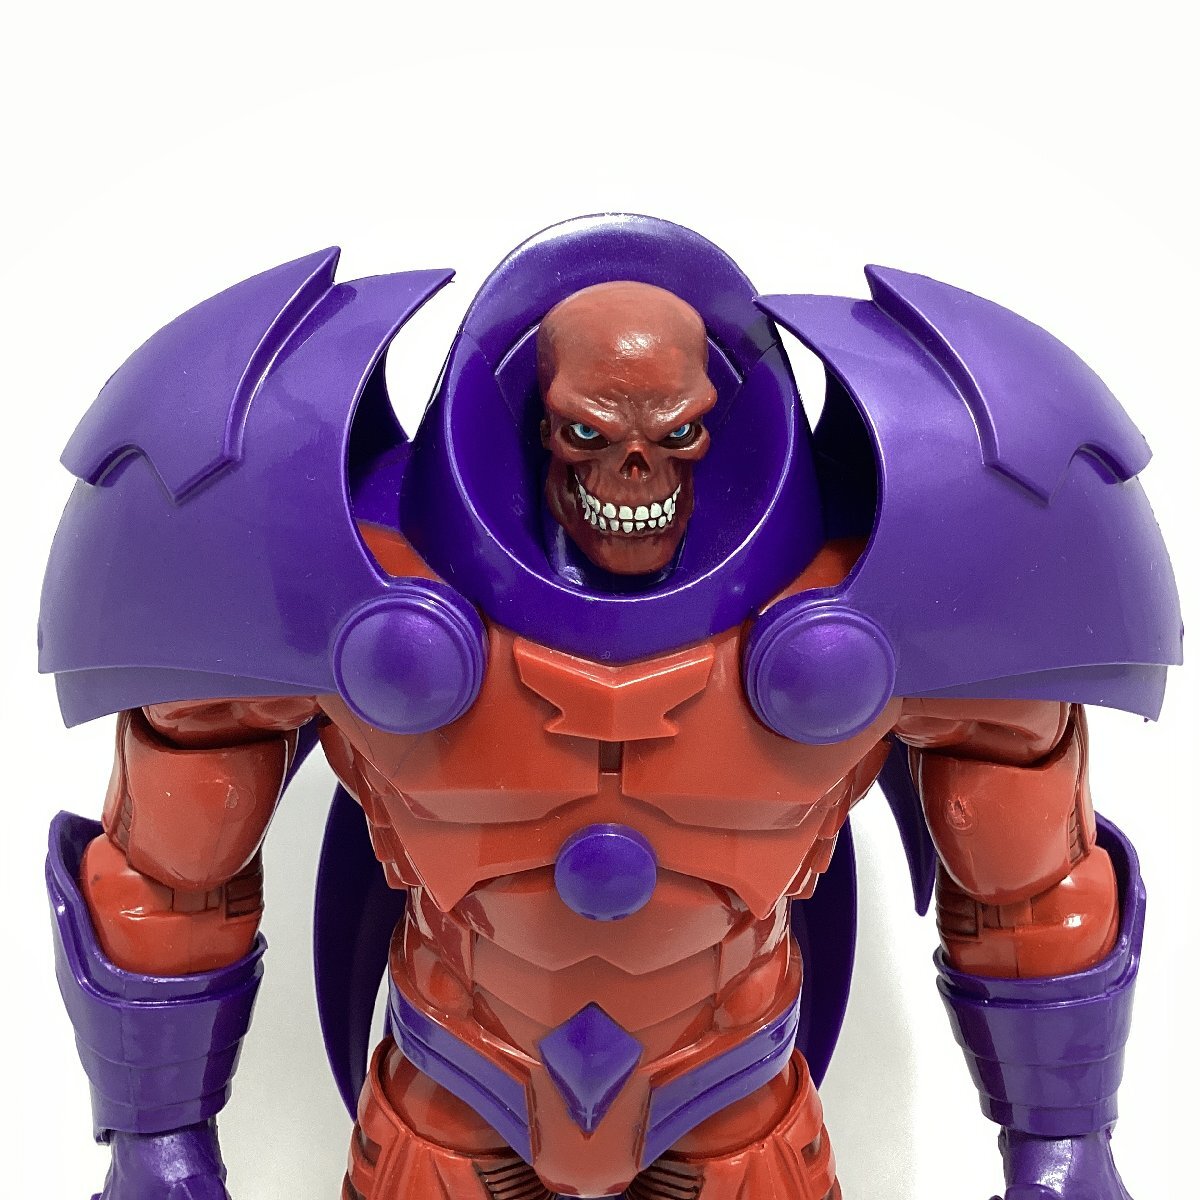  is zbroma- bell Legend red Onslaught build figure Hasbro Red Onslaught Captain America vi Ran 